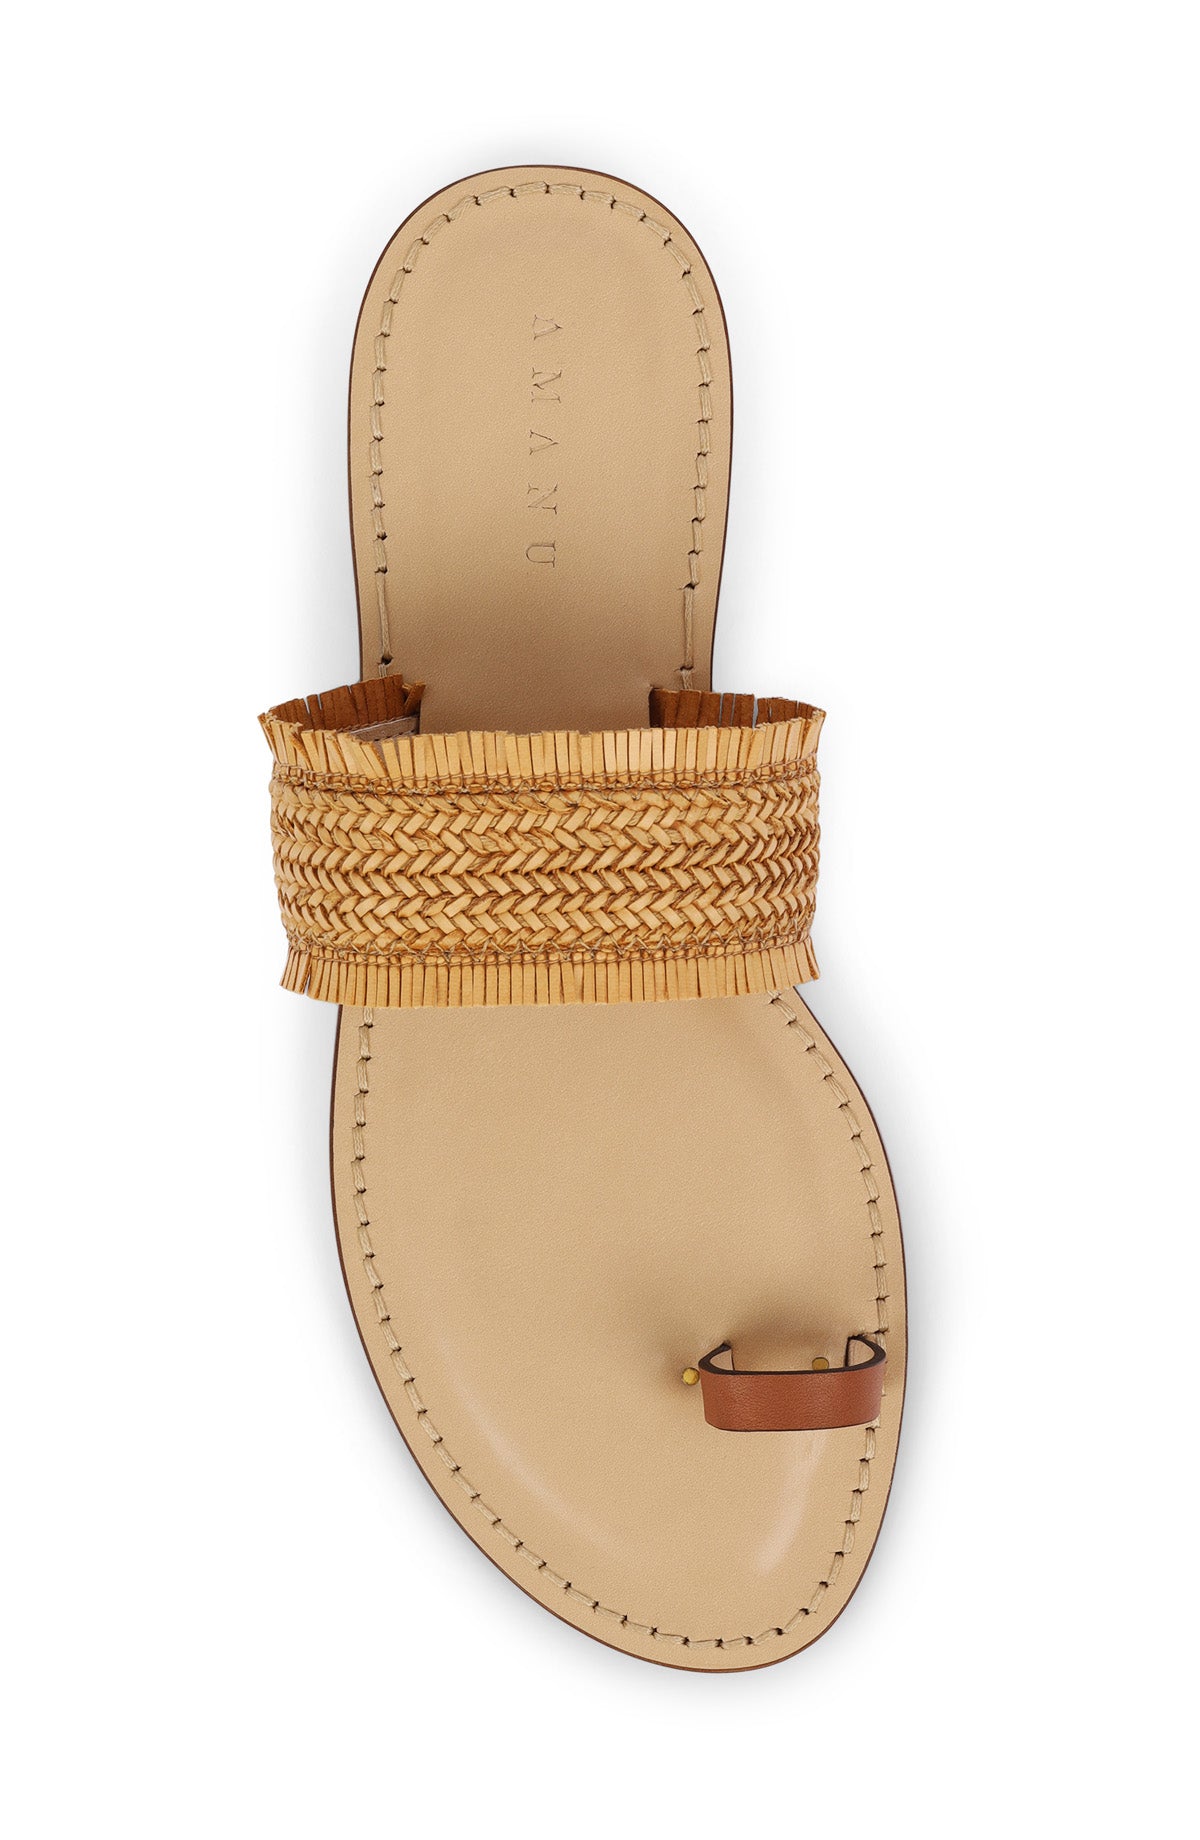 Style 06 | The Shela | Cognac Leather + Ochre Woven Leather | Nude Sole